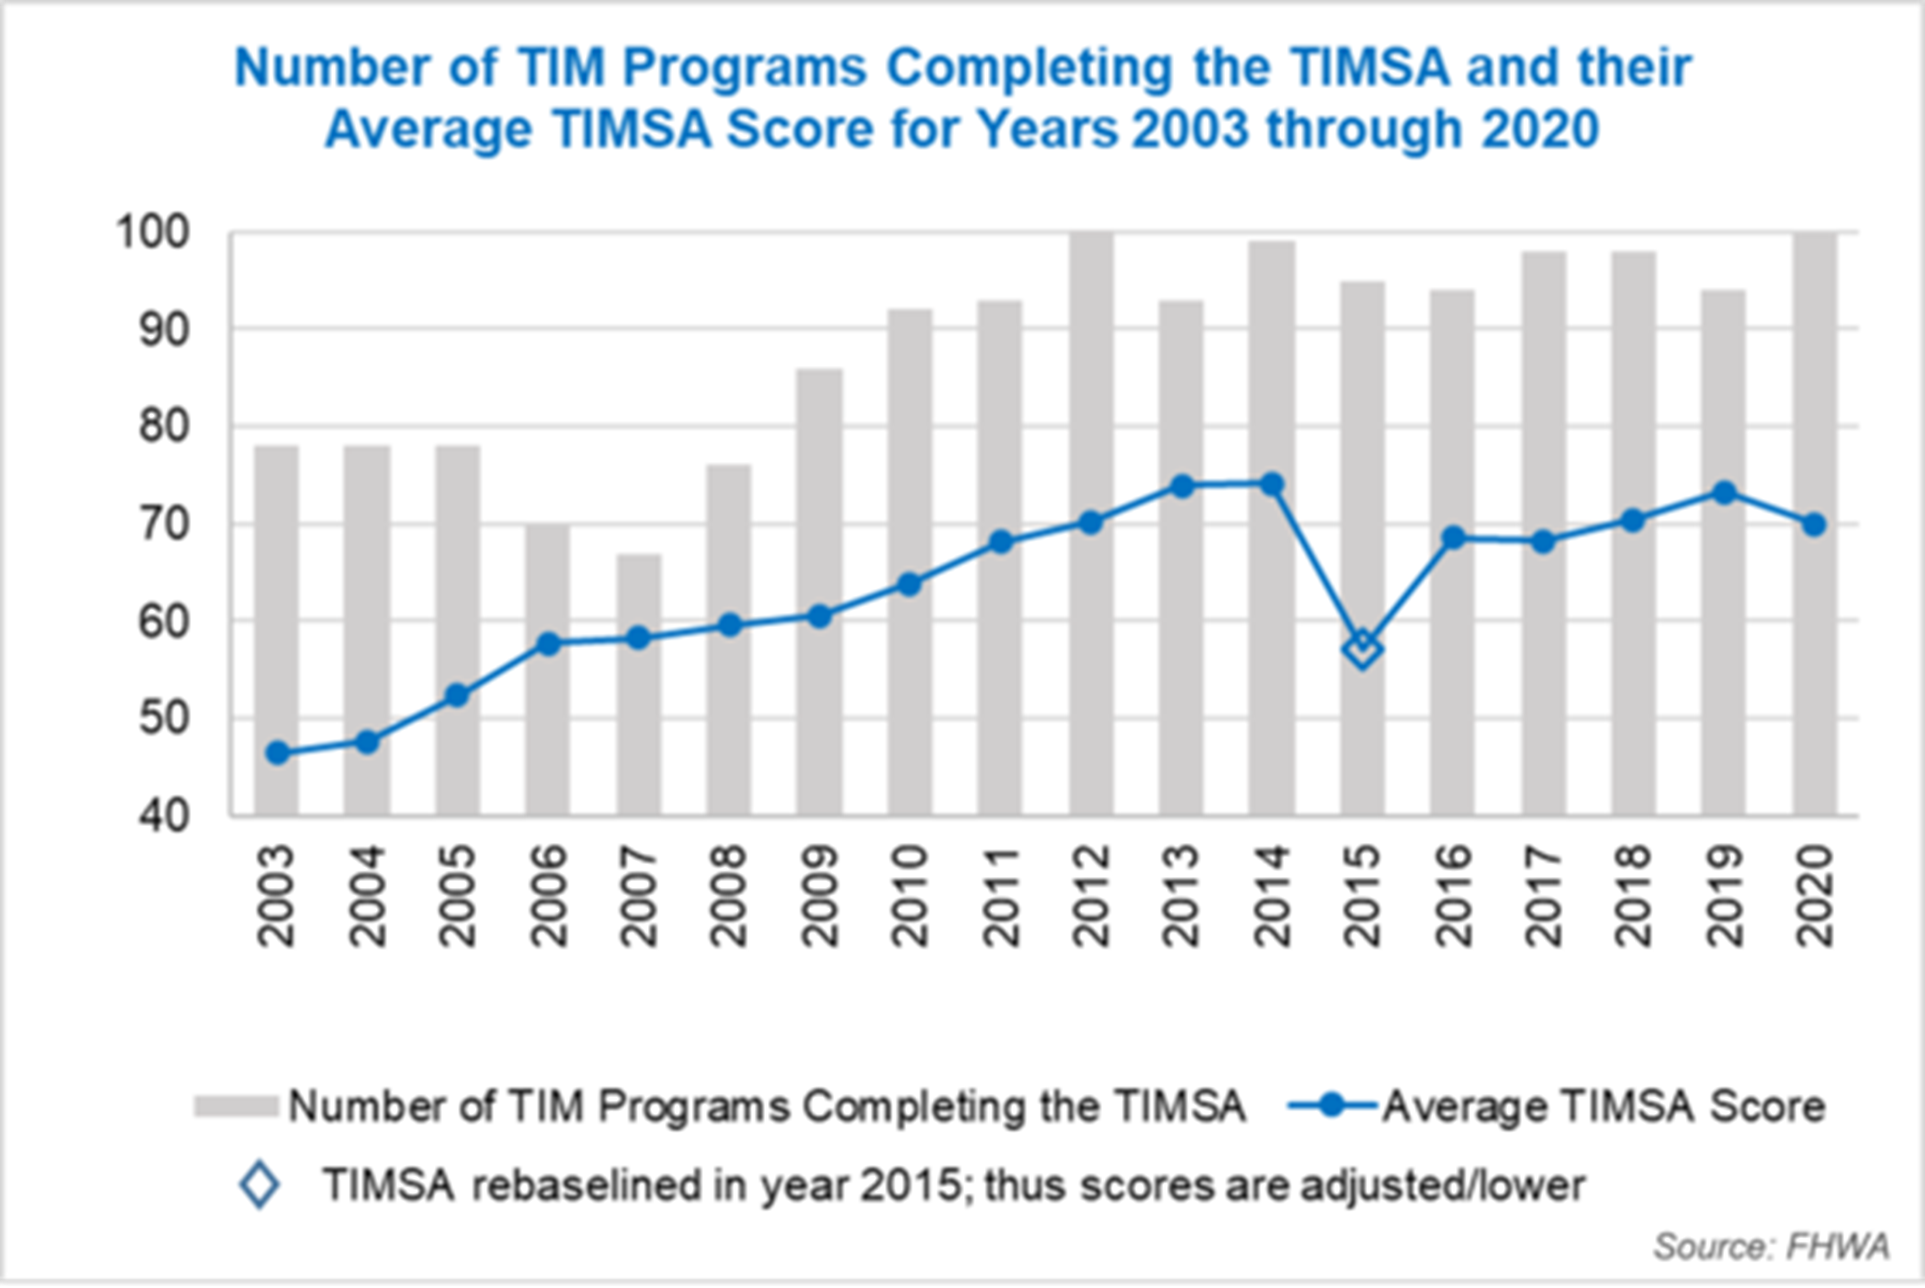 The number of TIM programs and their collective average TIMSA scores reflects advances in TIM program maturity from 2003 through today. This graph reflects data in the subsequent table.